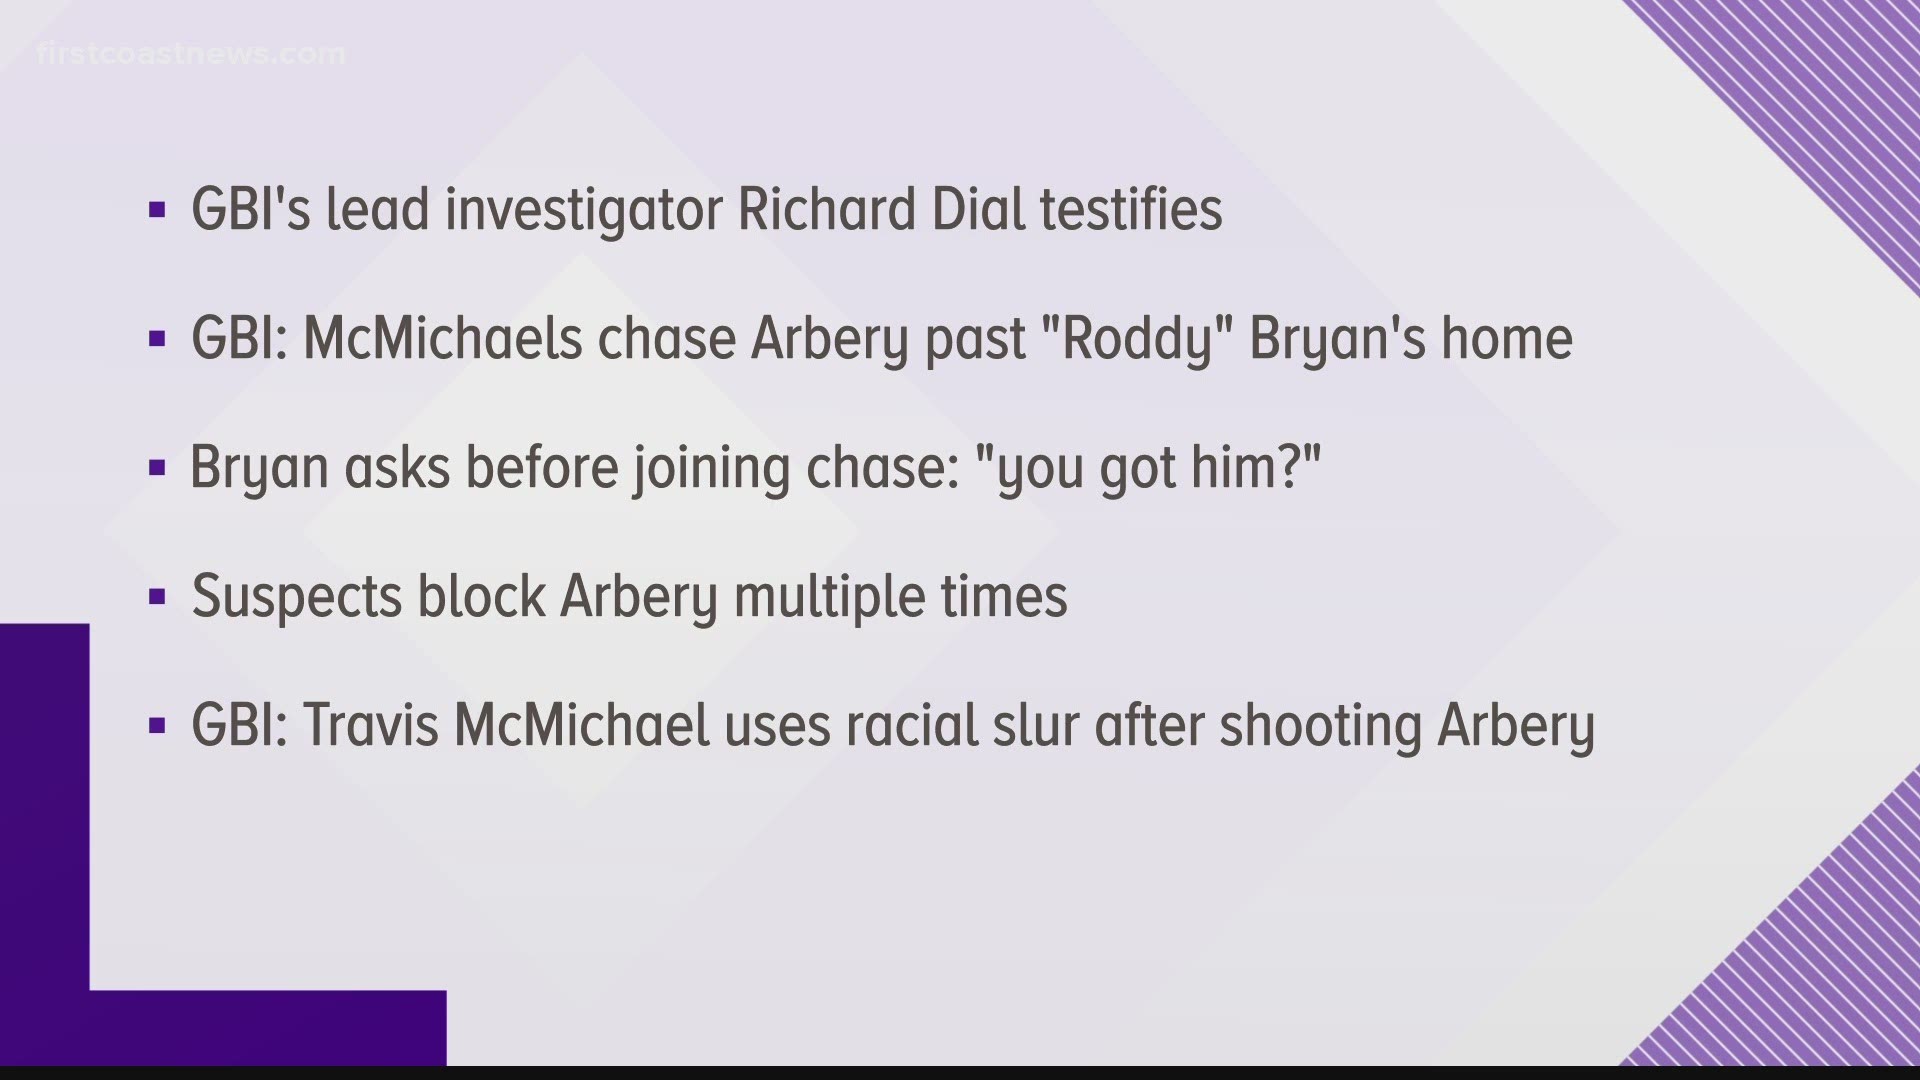 The GBI's lead investigator was the only witness to testify, and laid out step-by-step the events that unfolded on the day Arbery was shot and killed.